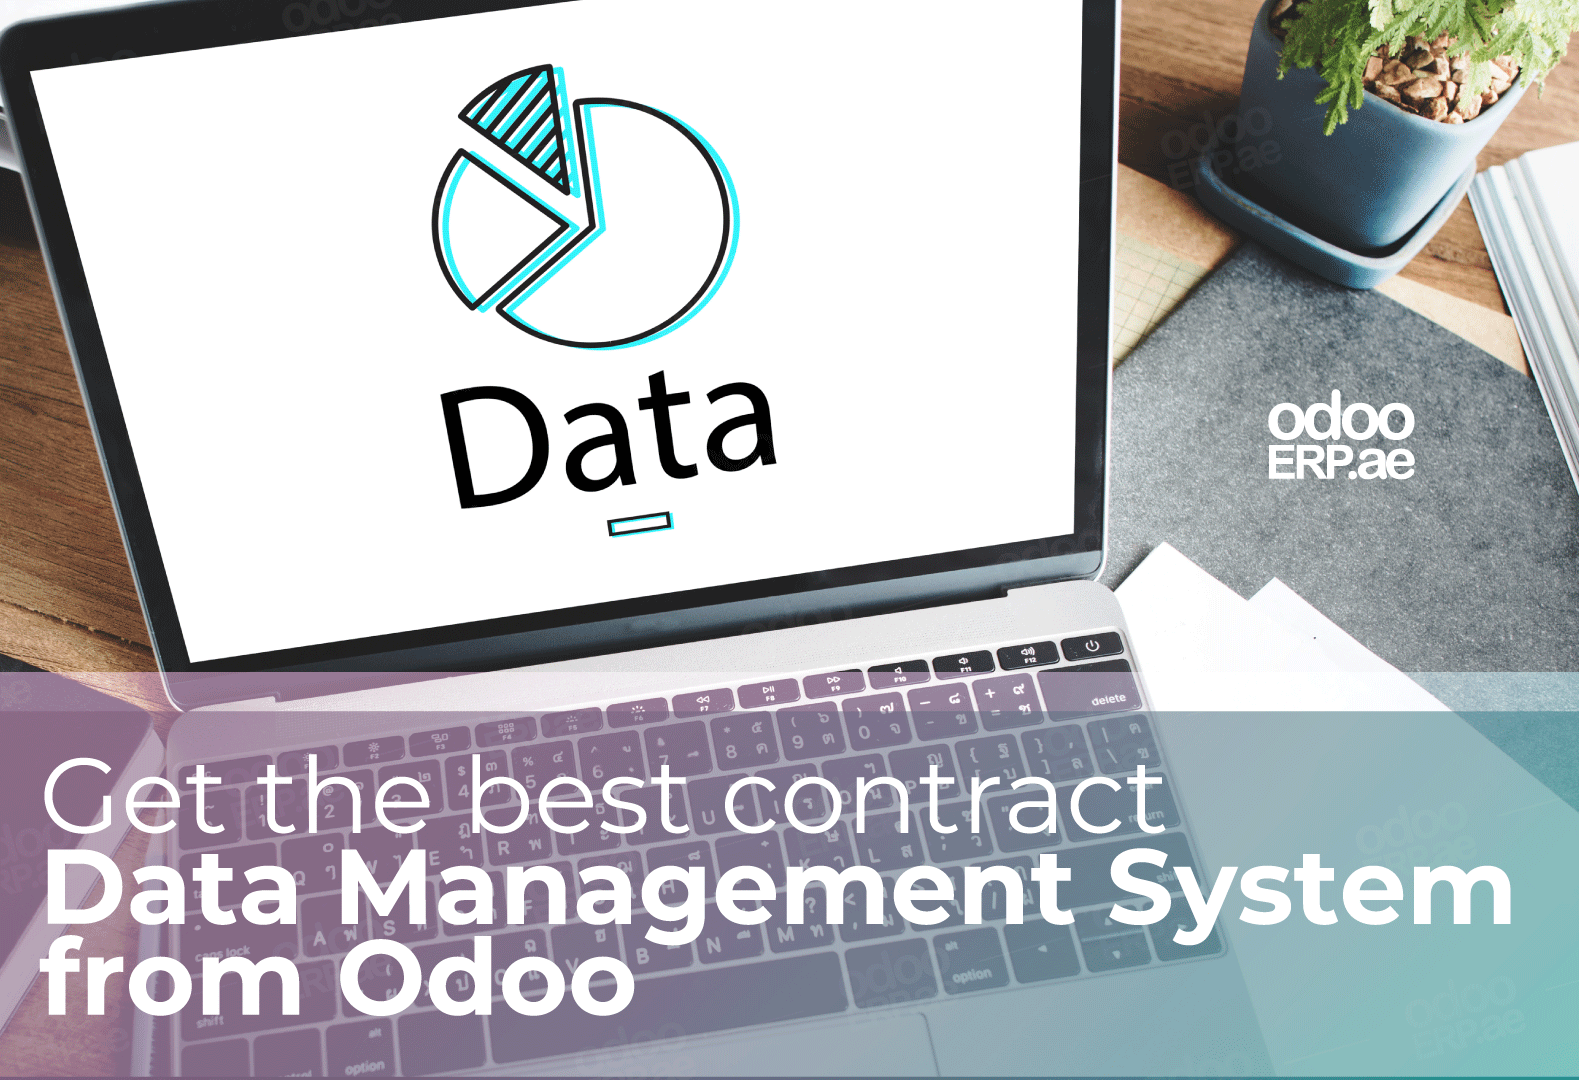 Get the best contract data management system from Odoo